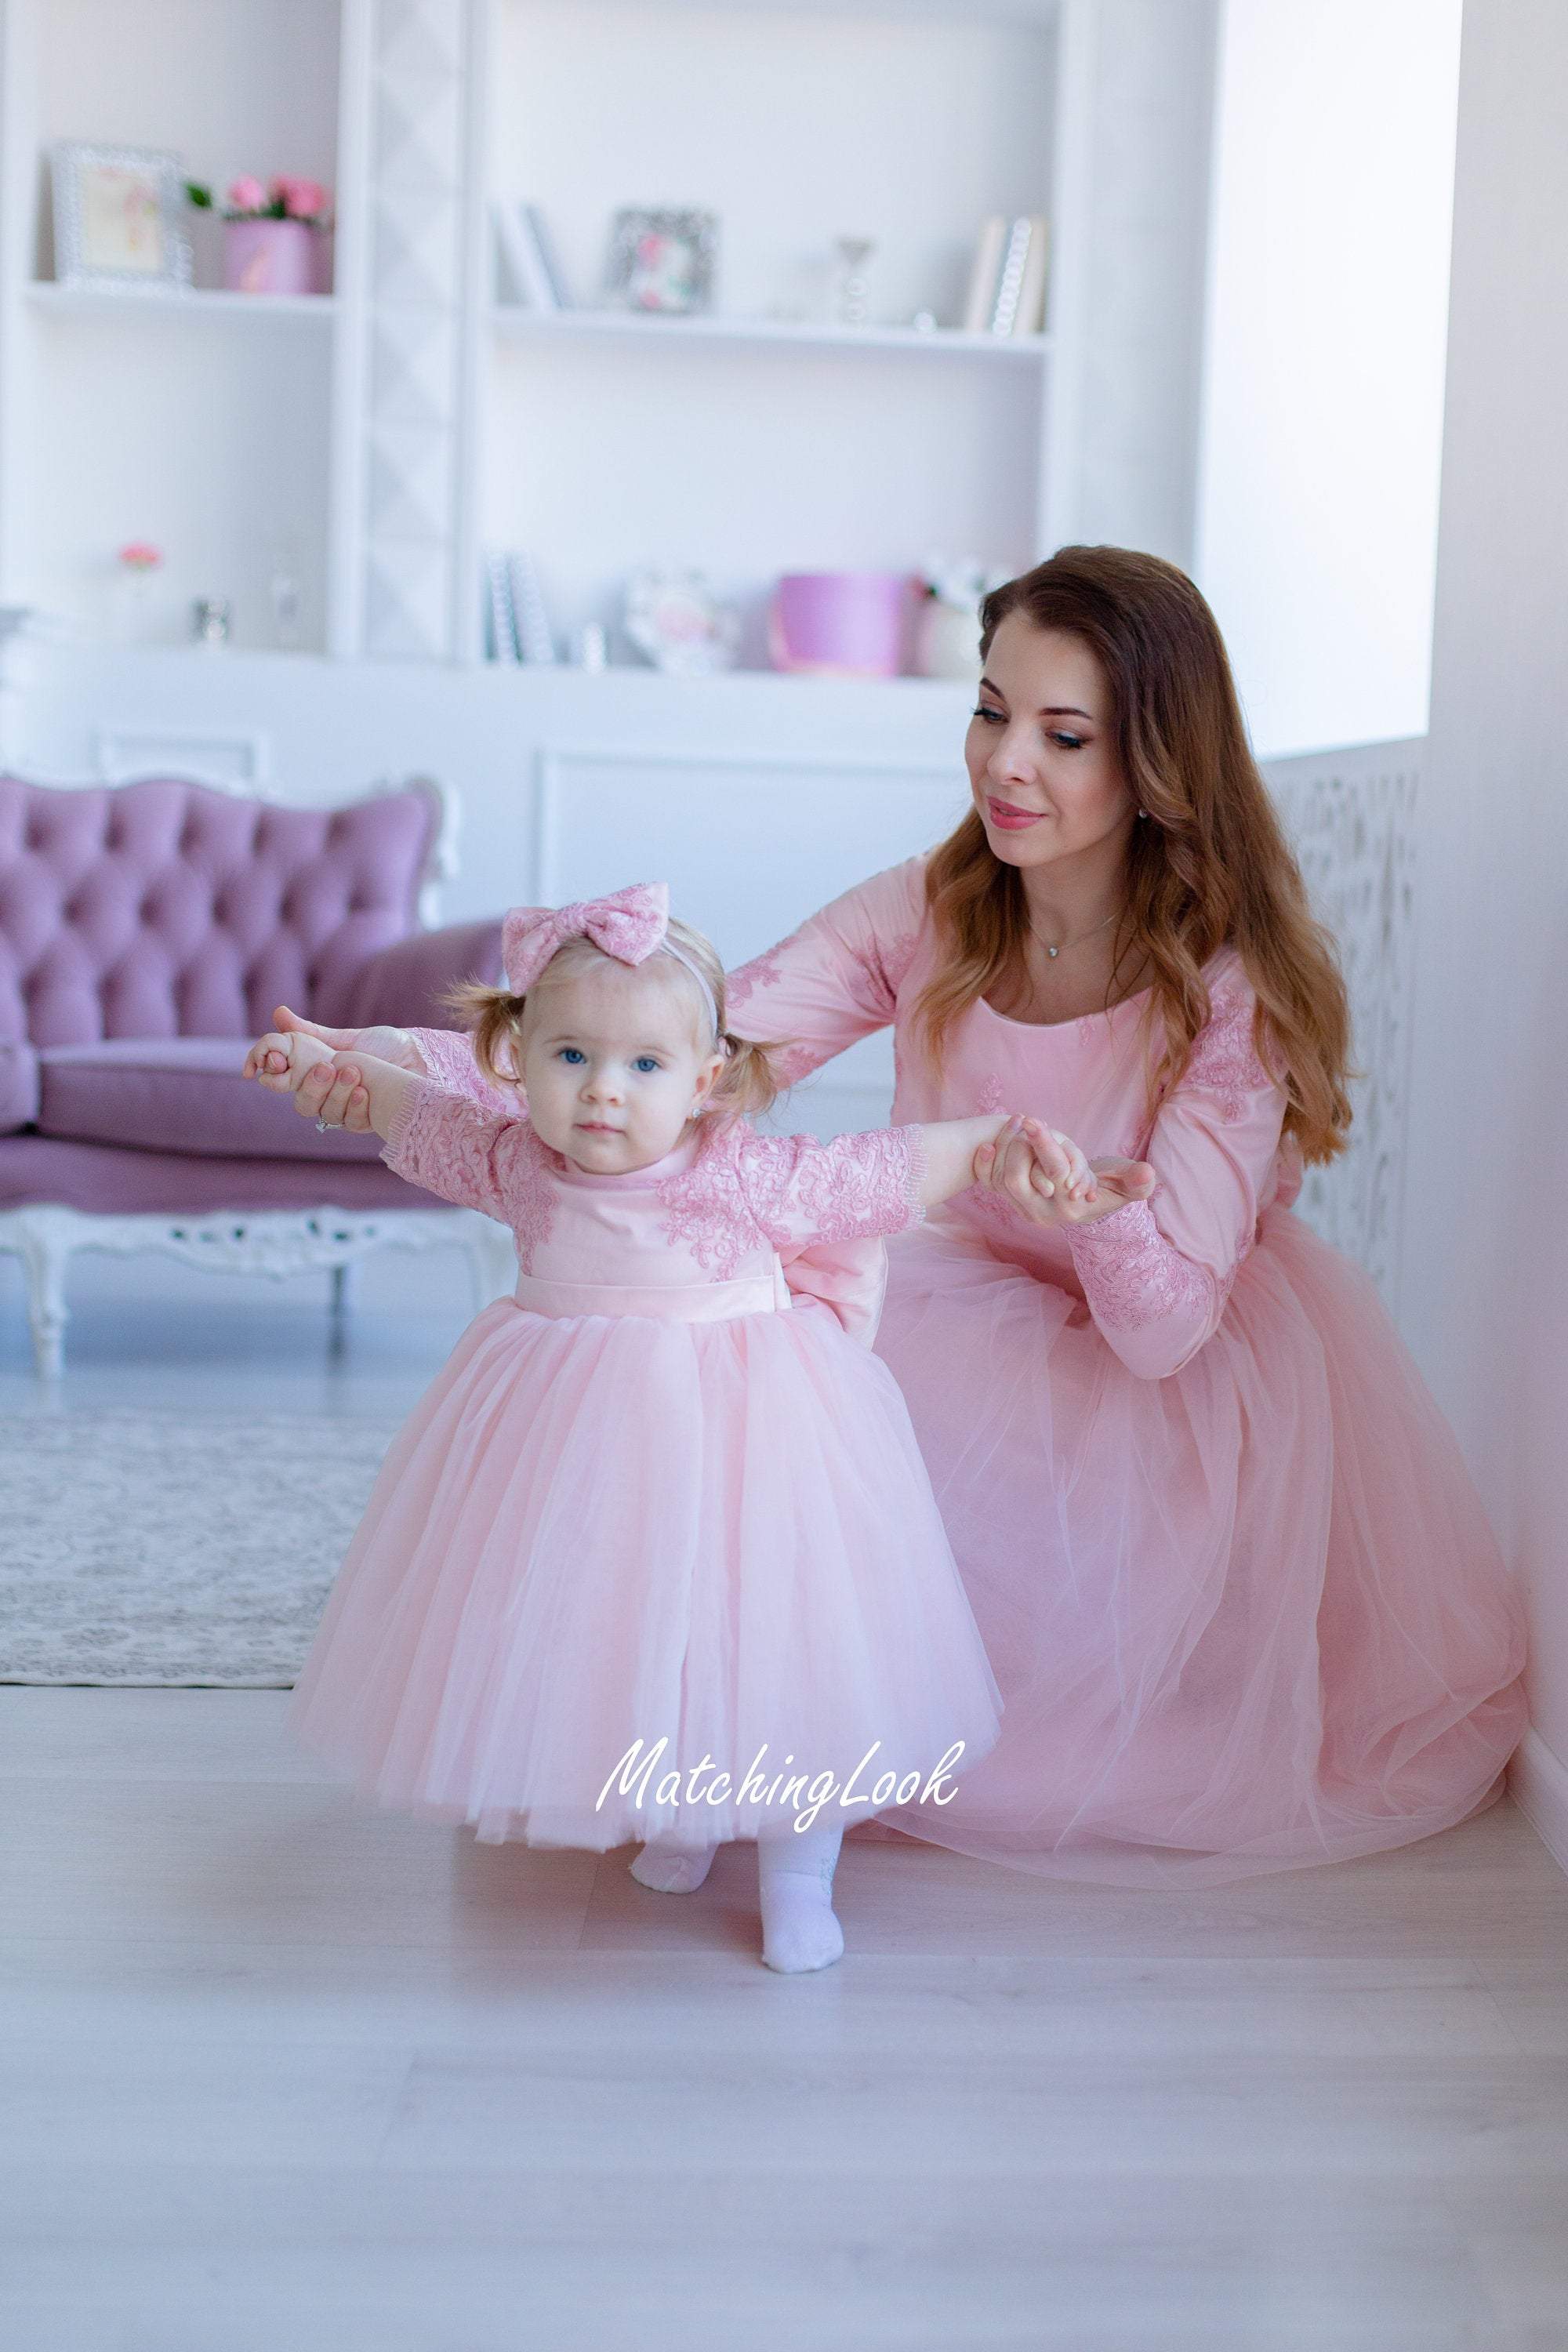 Sweet Pink Princess Pink Ballgown Dress For Baby Girls Perfect For  Christening, First Birthday Parties And Infantil LJ201222 From Cong05,  $10.43 | DHgate.Com